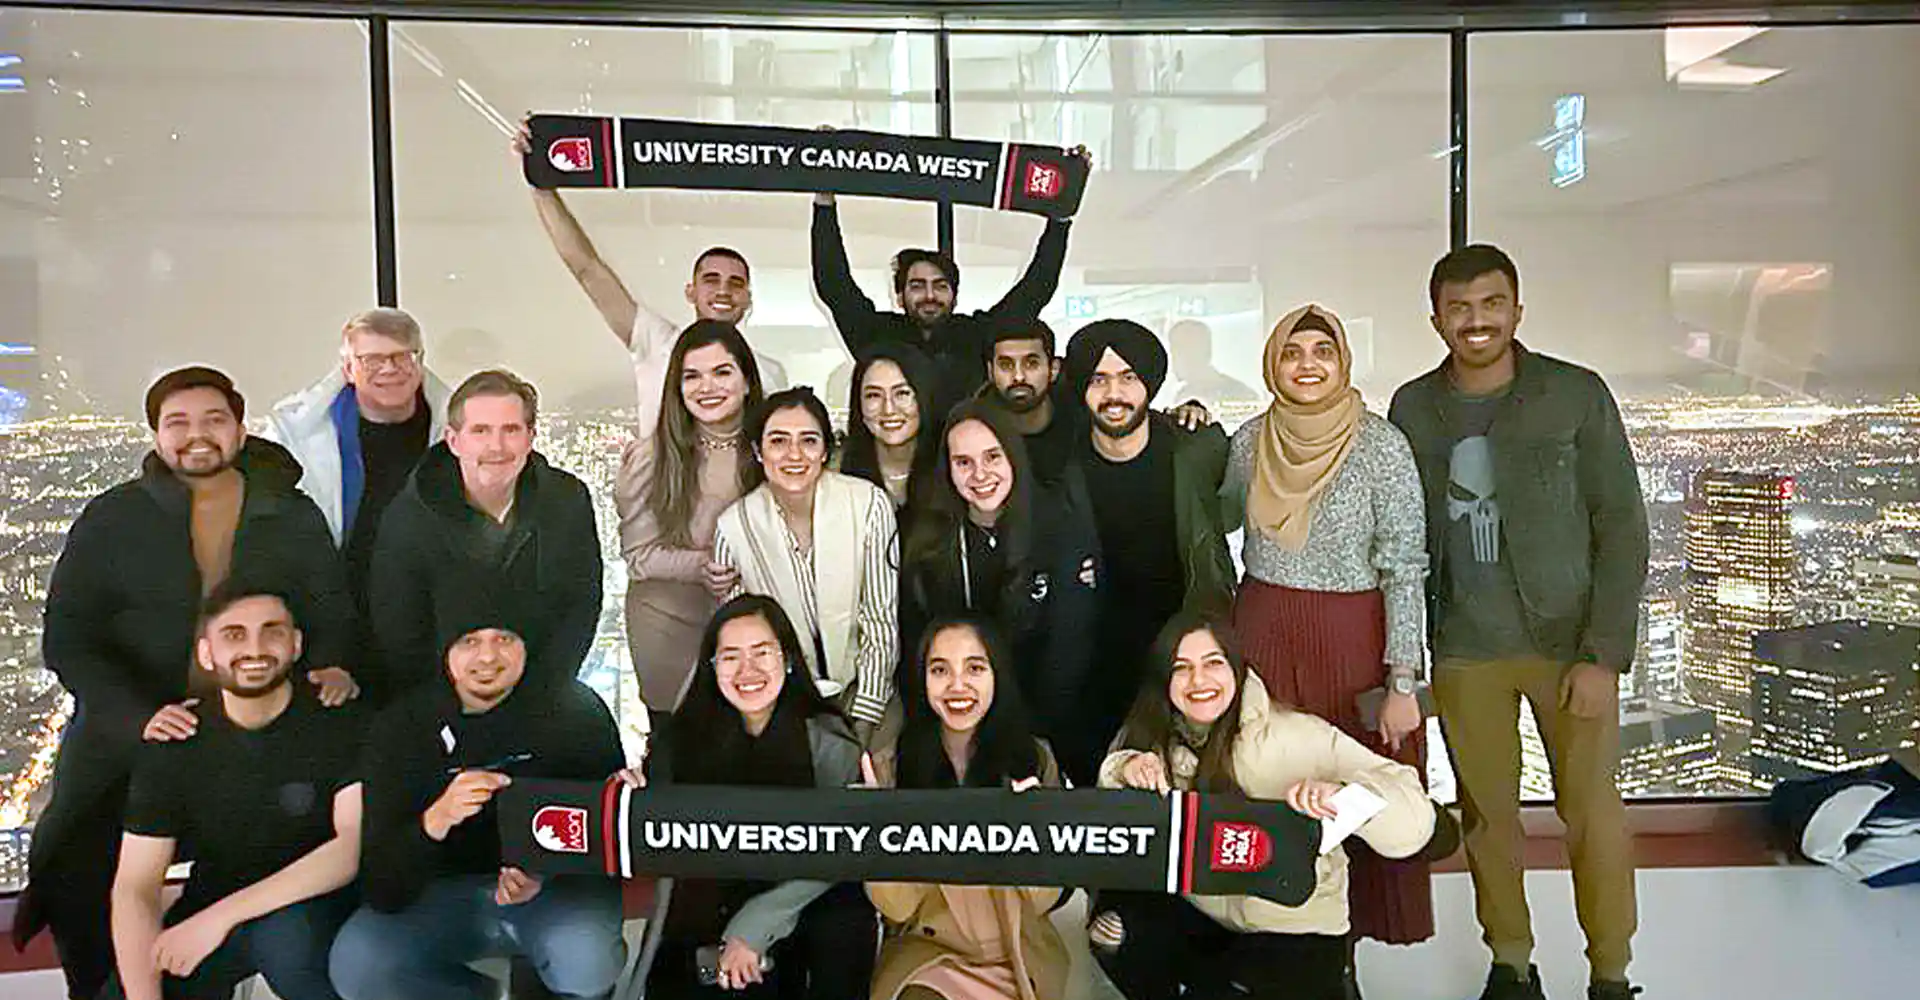  UCW finishes 4th at Canadian MBA Games